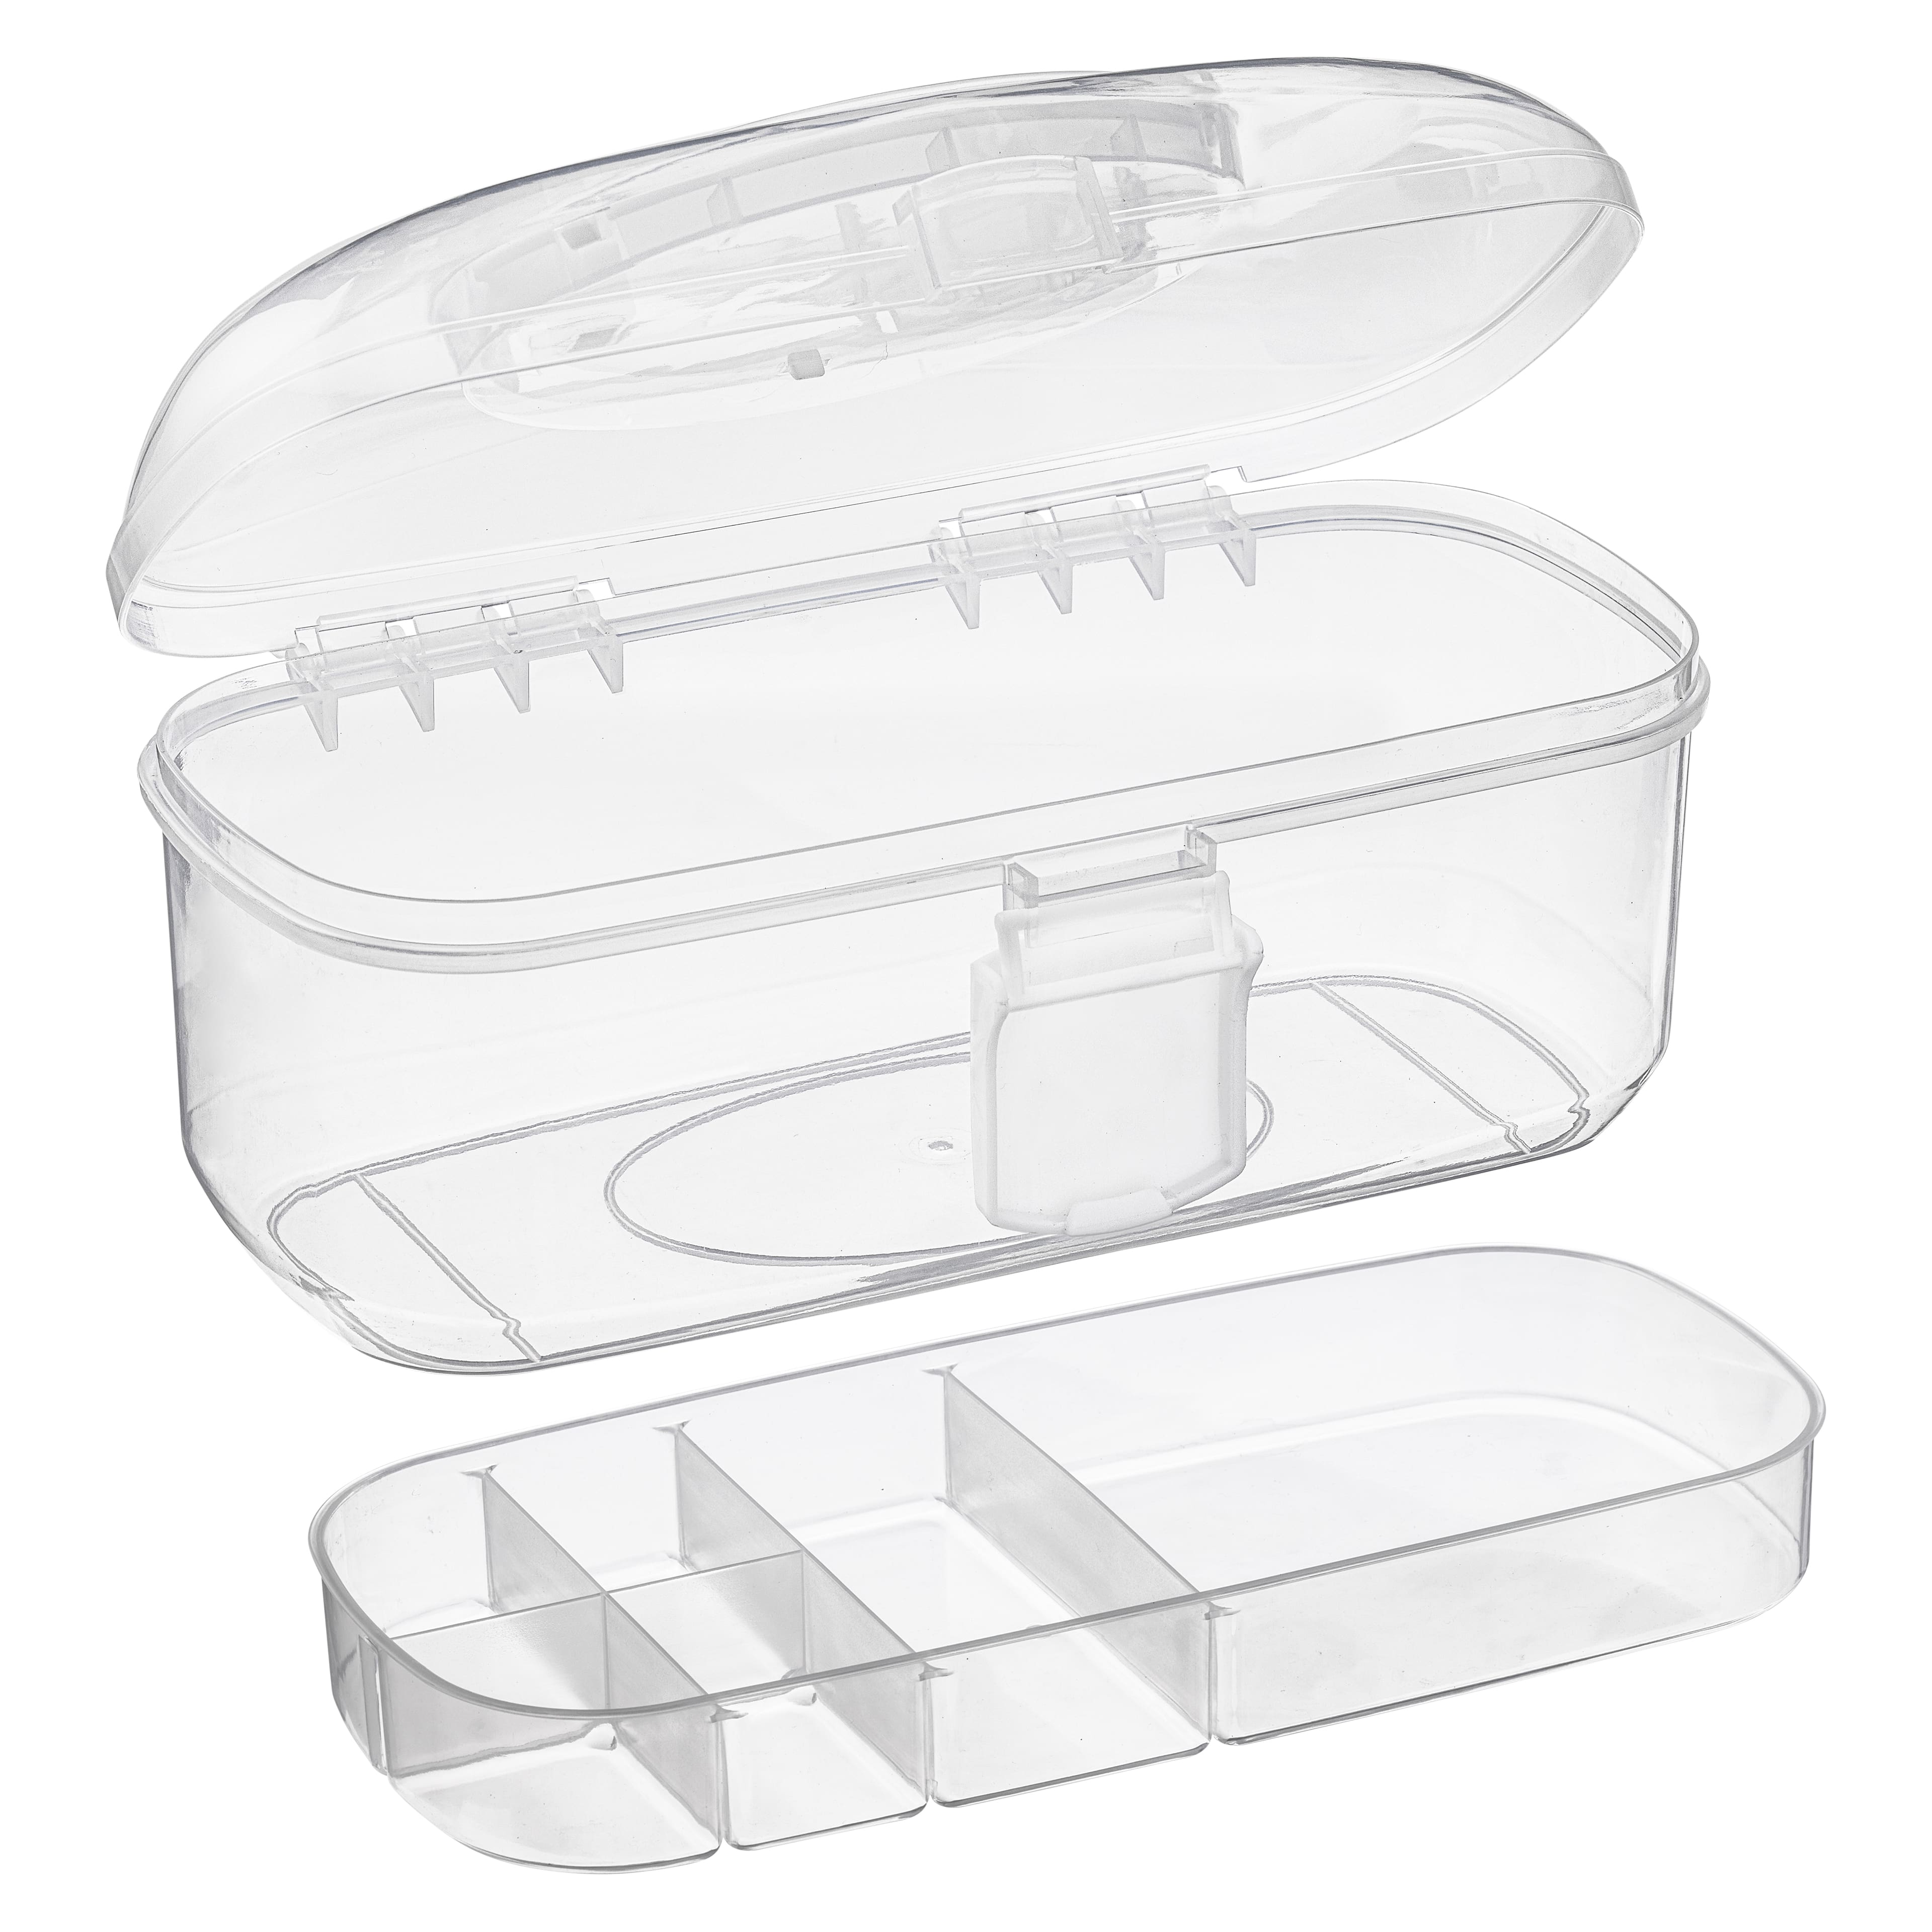 17 Compartment Bead Organizer by Simply Tidy™, Michaels